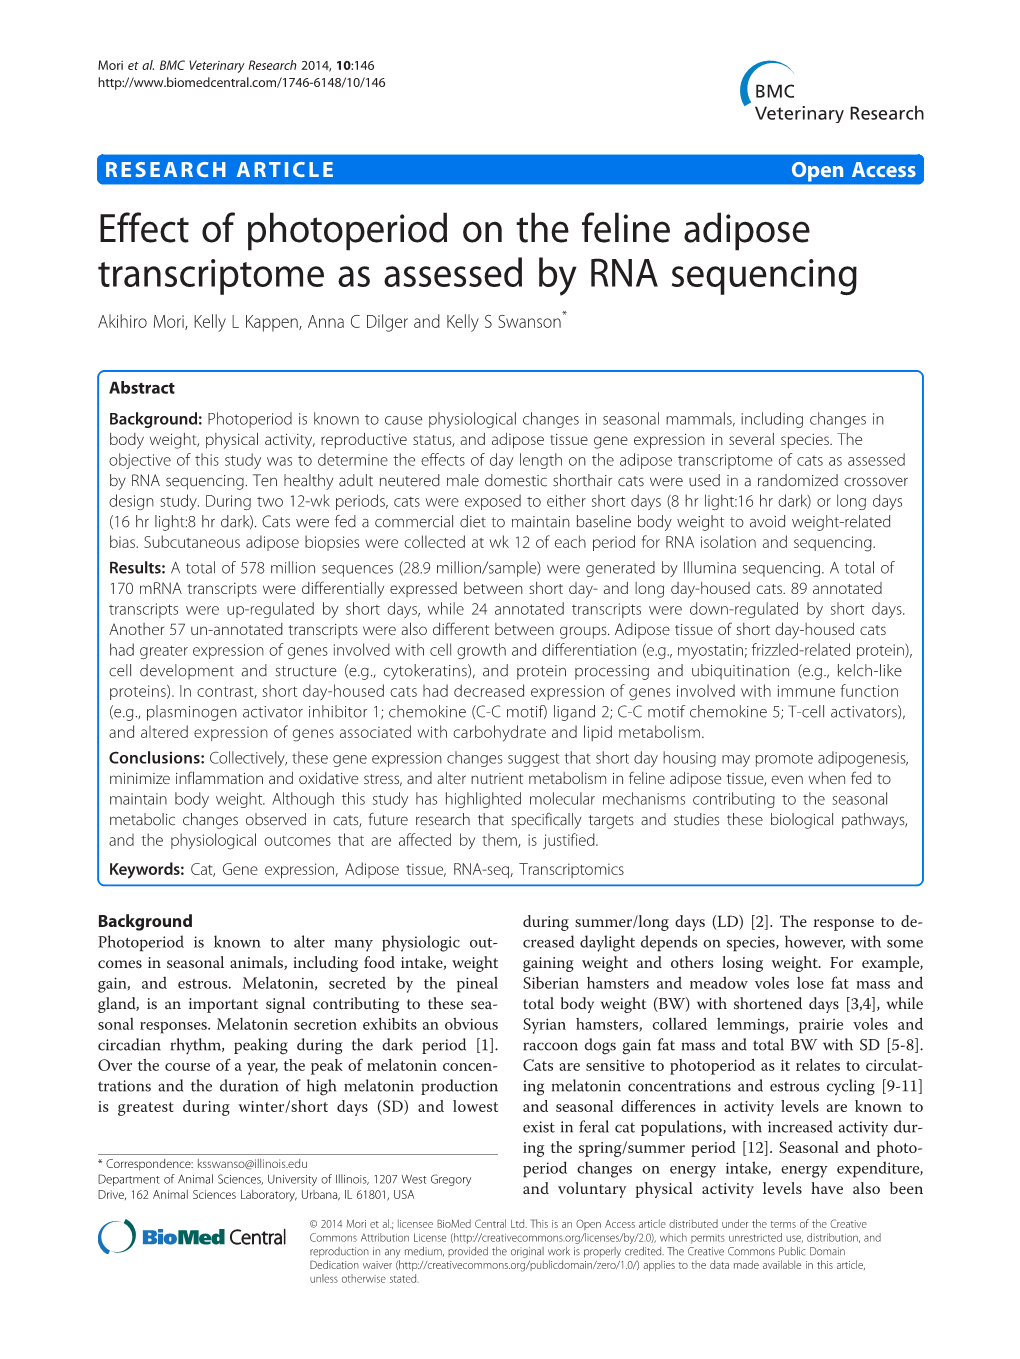 Effect of Photoperiod on the Feline Adipose Transcriptome As Assessed by RNA Sequencing Akihiro Mori, Kelly L Kappen, Anna C Dilger and Kelly S Swanson*